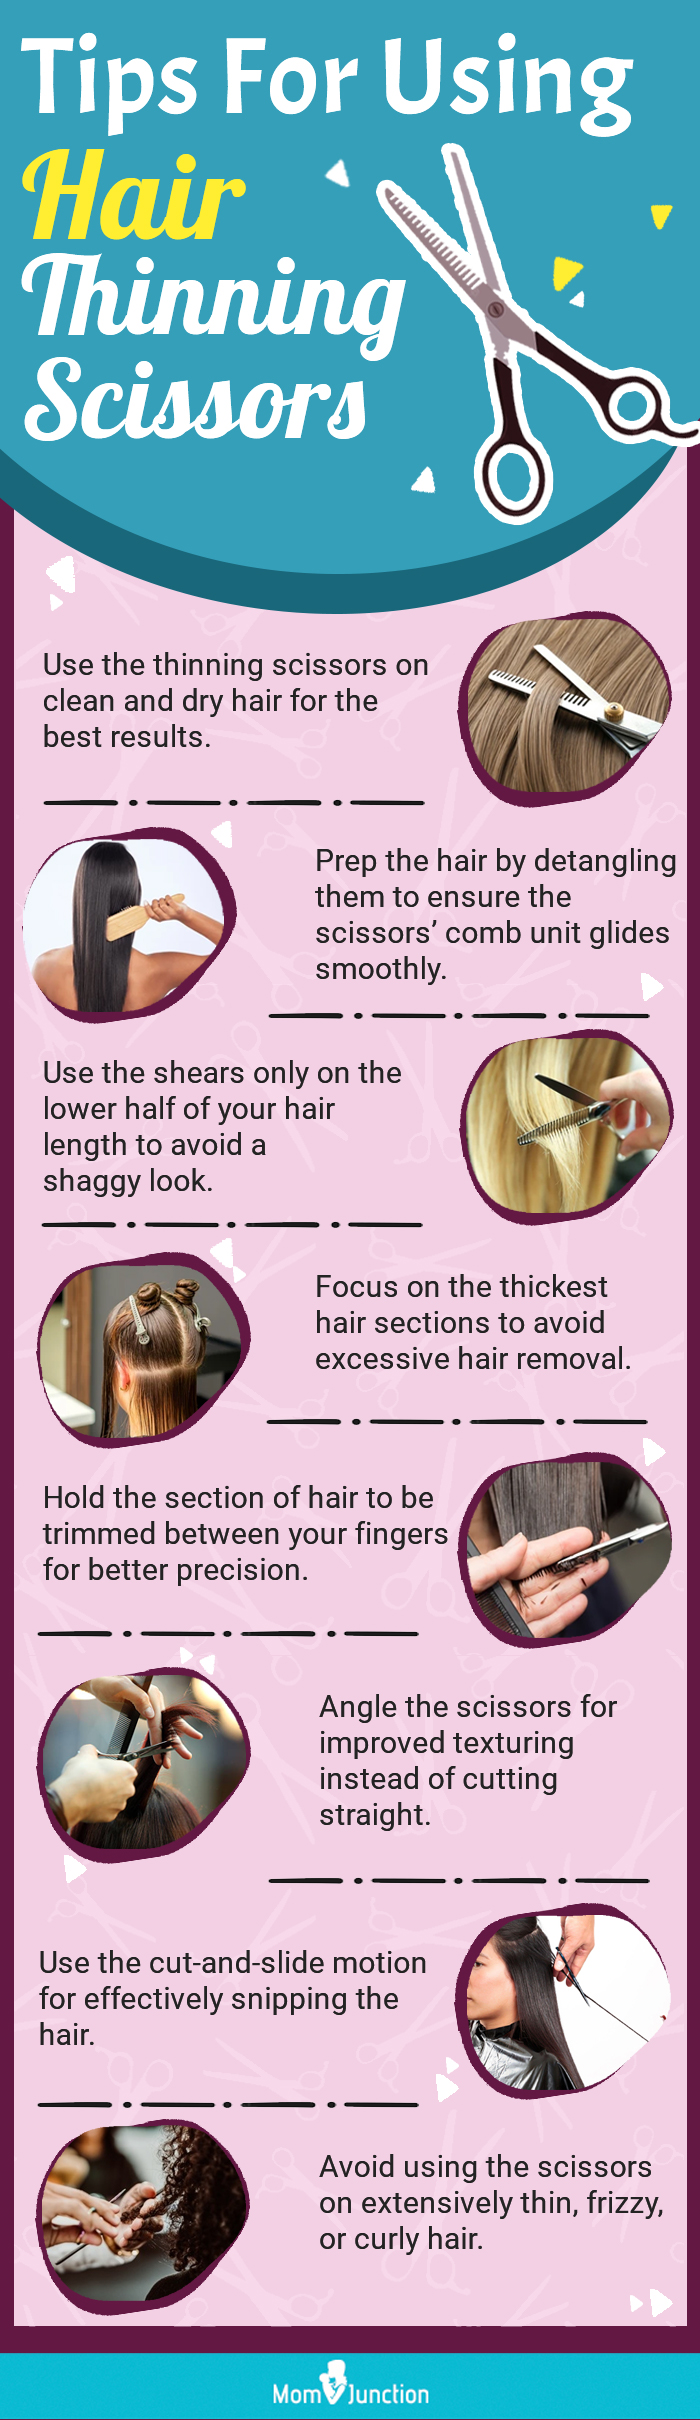 Tips For Using Hair Thinning Scissors (infographic)